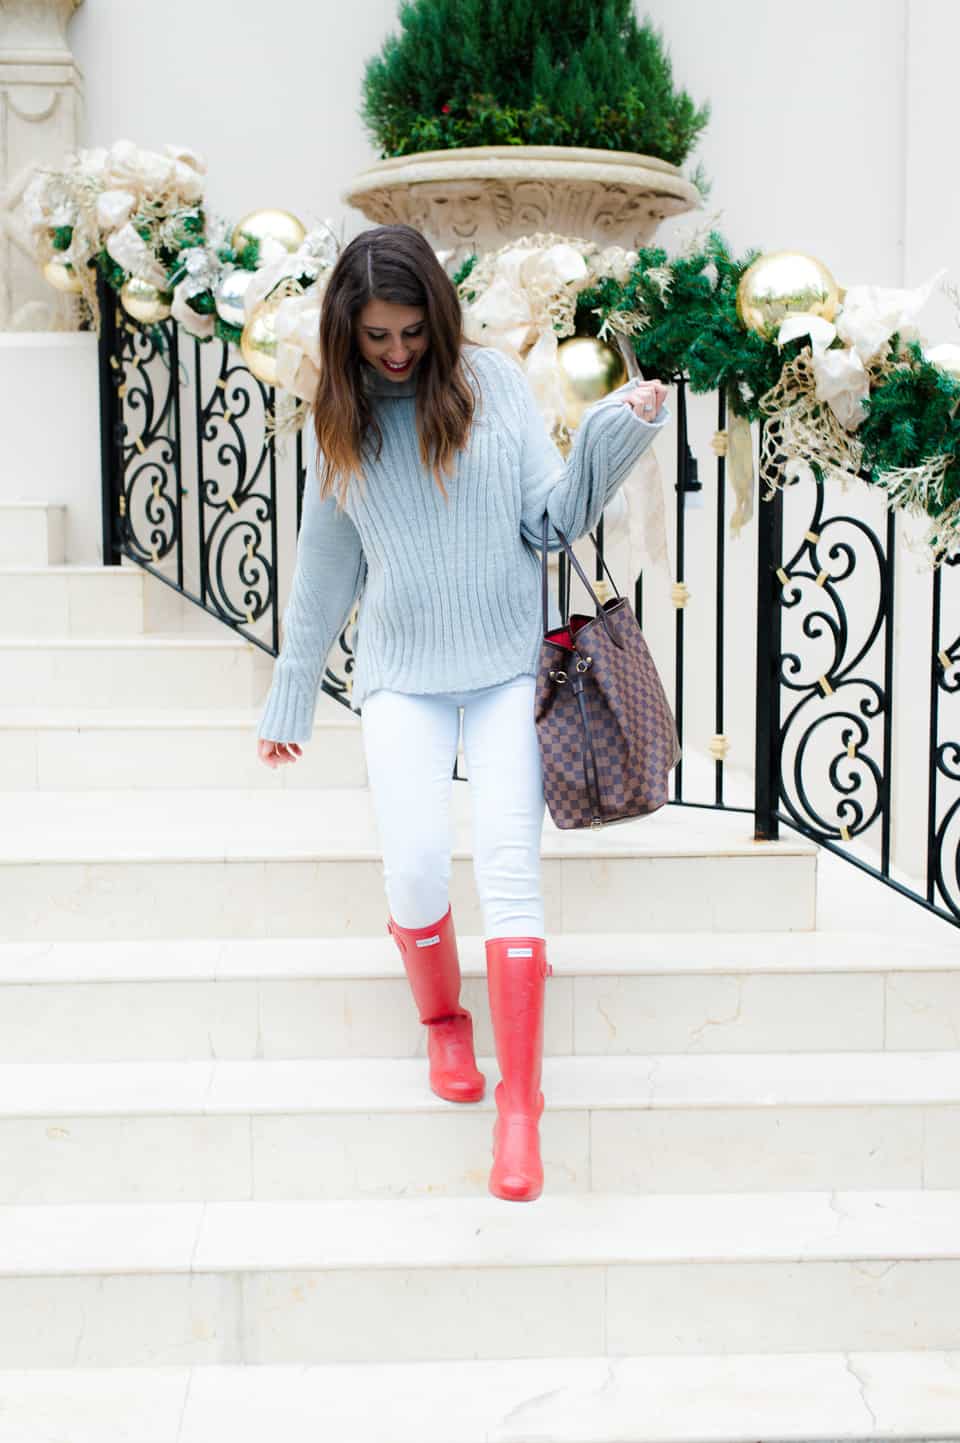 Dress Up Buttercup // A Houston-based fashion travel blog developed to daily inspire your own personal style by Dede Raad | How to Get Into the Christmas Spirit